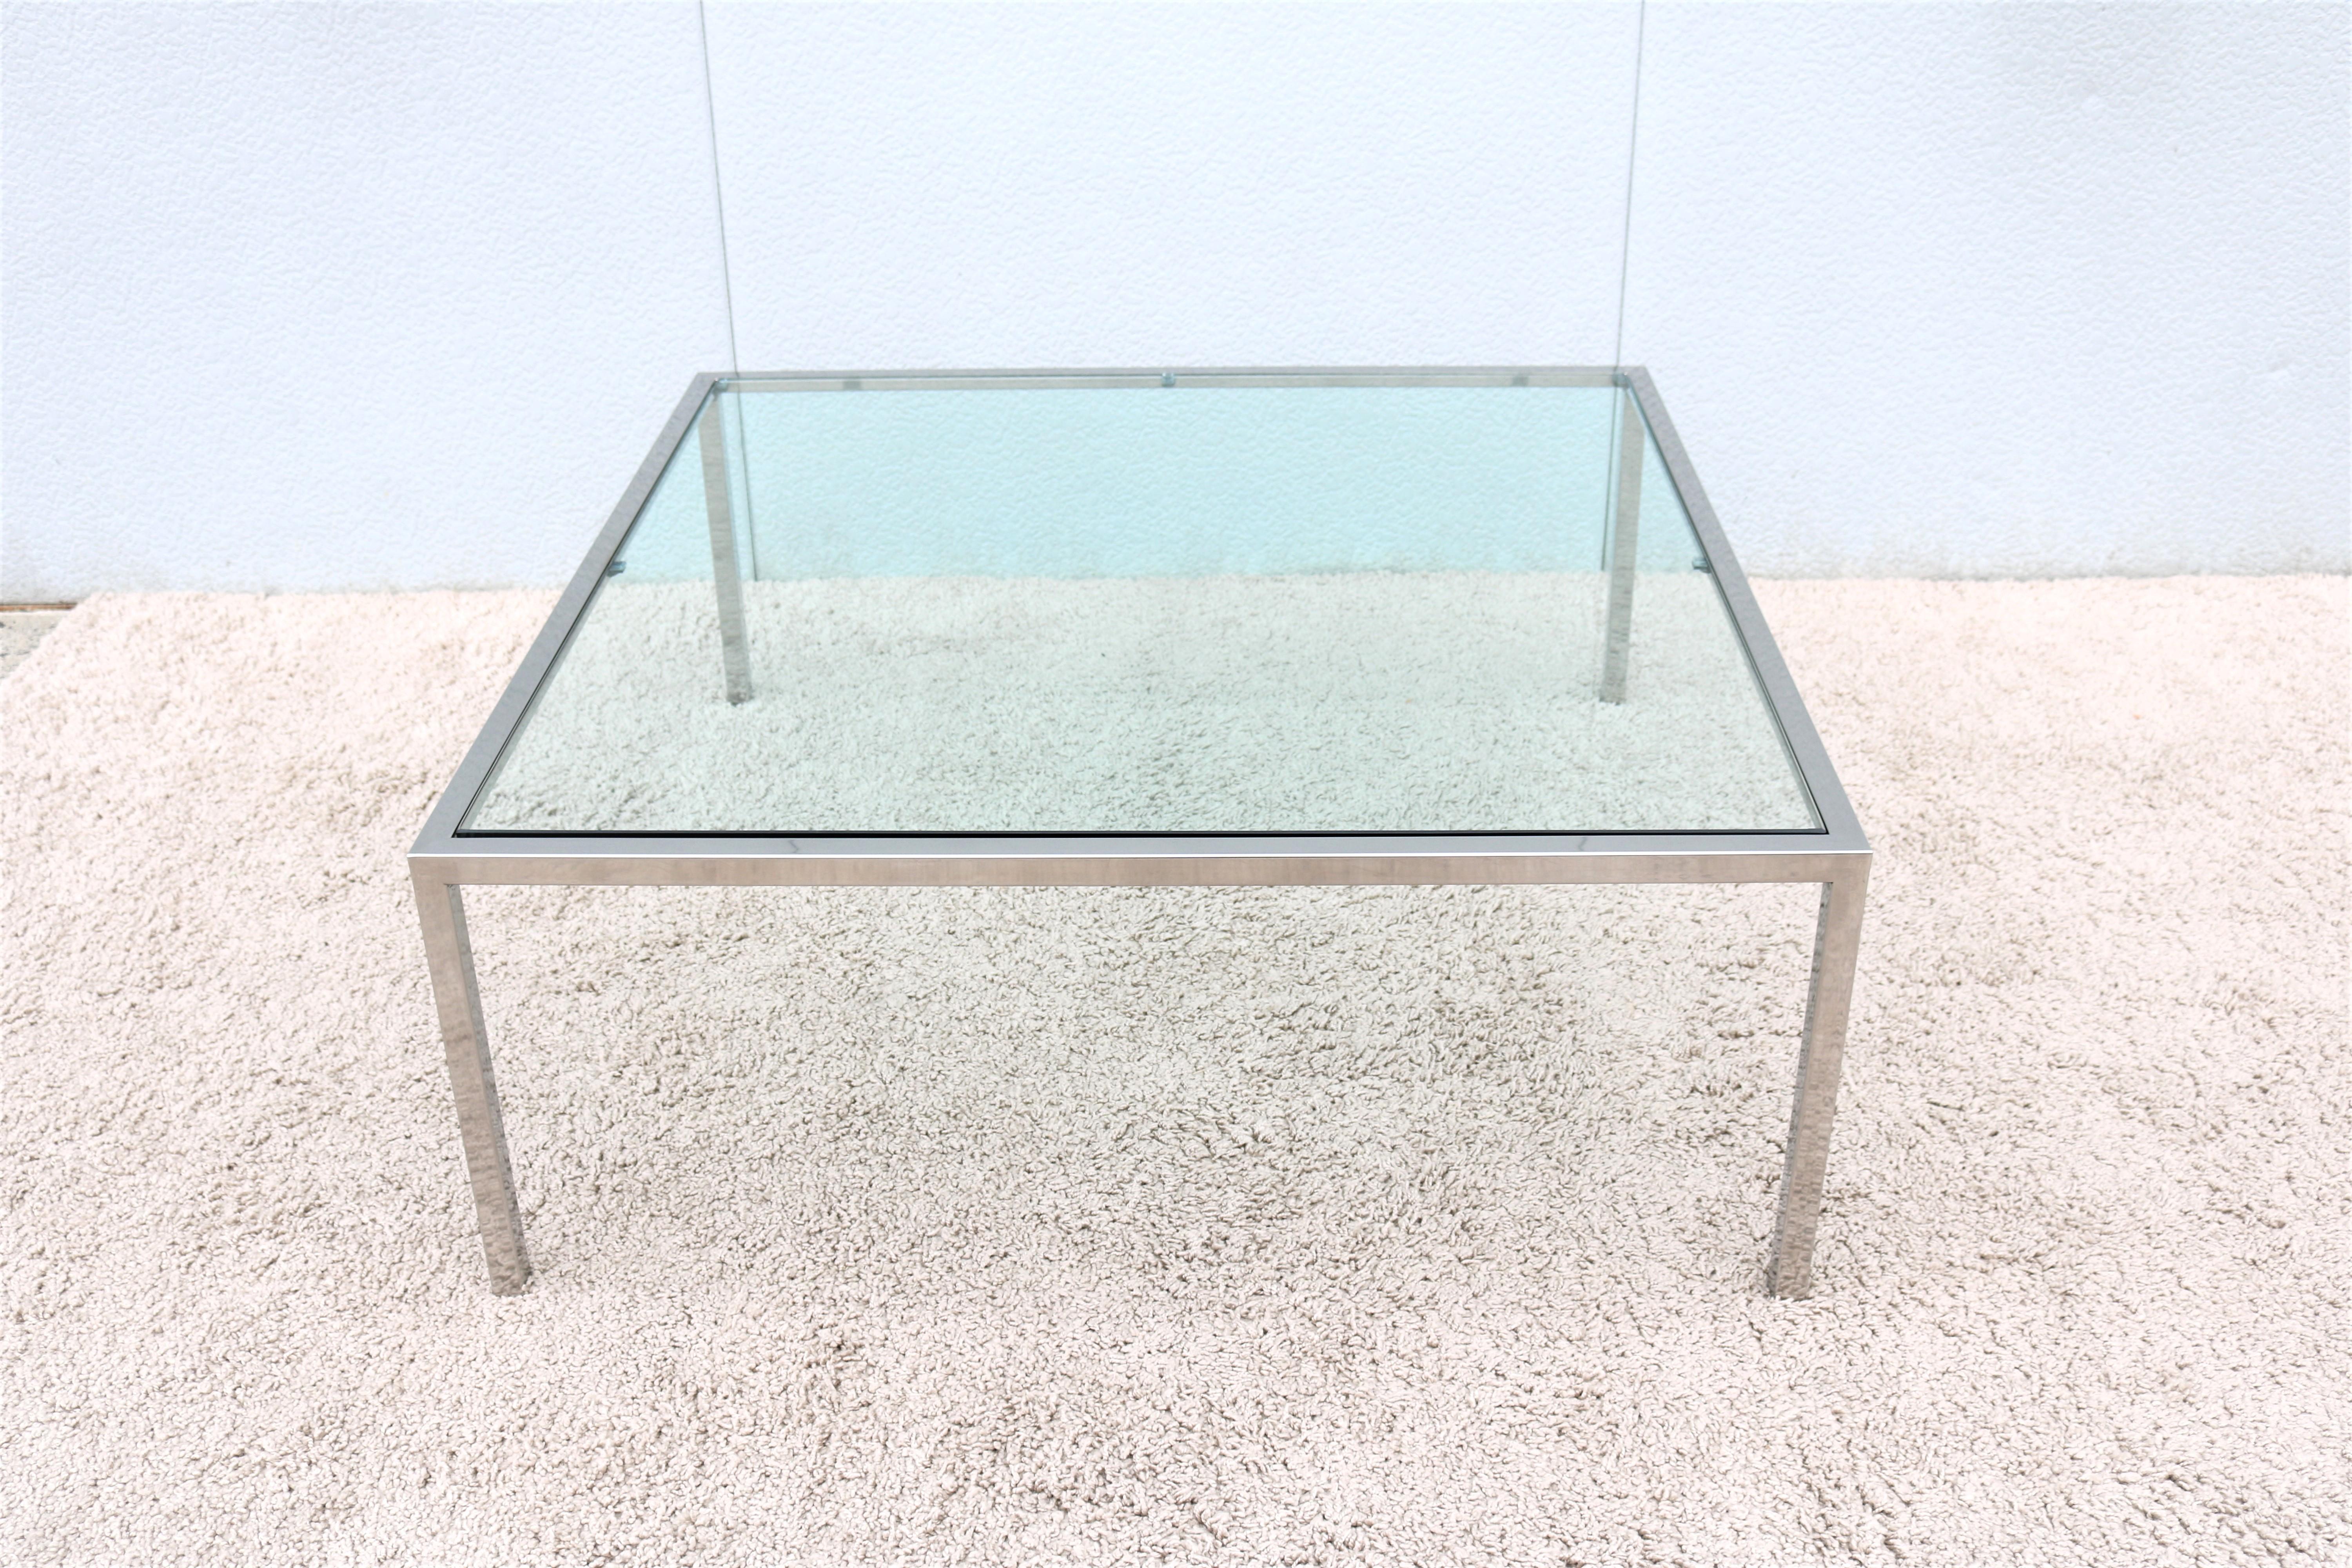 Stunning and elegant looking mid-century modern Milo Baughman style polished stainless steel and inset glass top square coffee table.
Fine quality and beautiful craftsmanship make this table an attractive centerpiece for the living room.
The